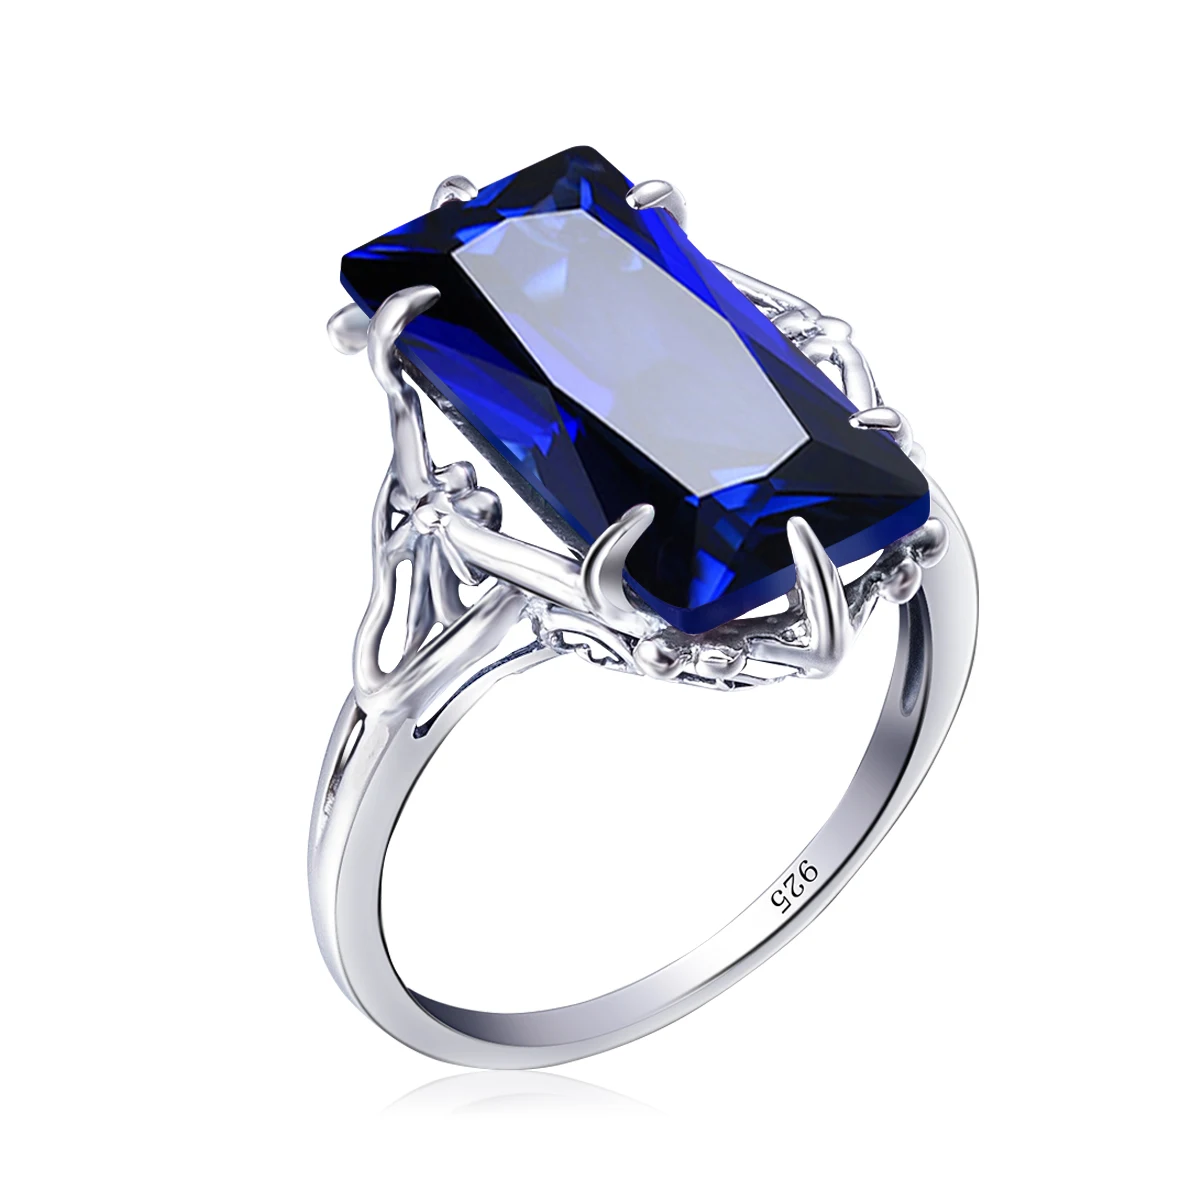 100% Handmade Sterling Silver 925 Big Sapphire Ring For Women Classic With Stone - $51.02